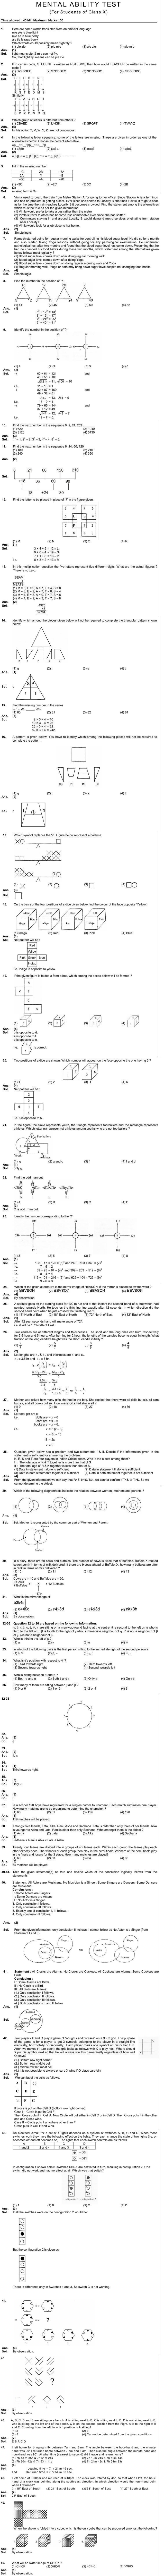 NTSE 2013 Stage II Question Paper and Solutions - MAT